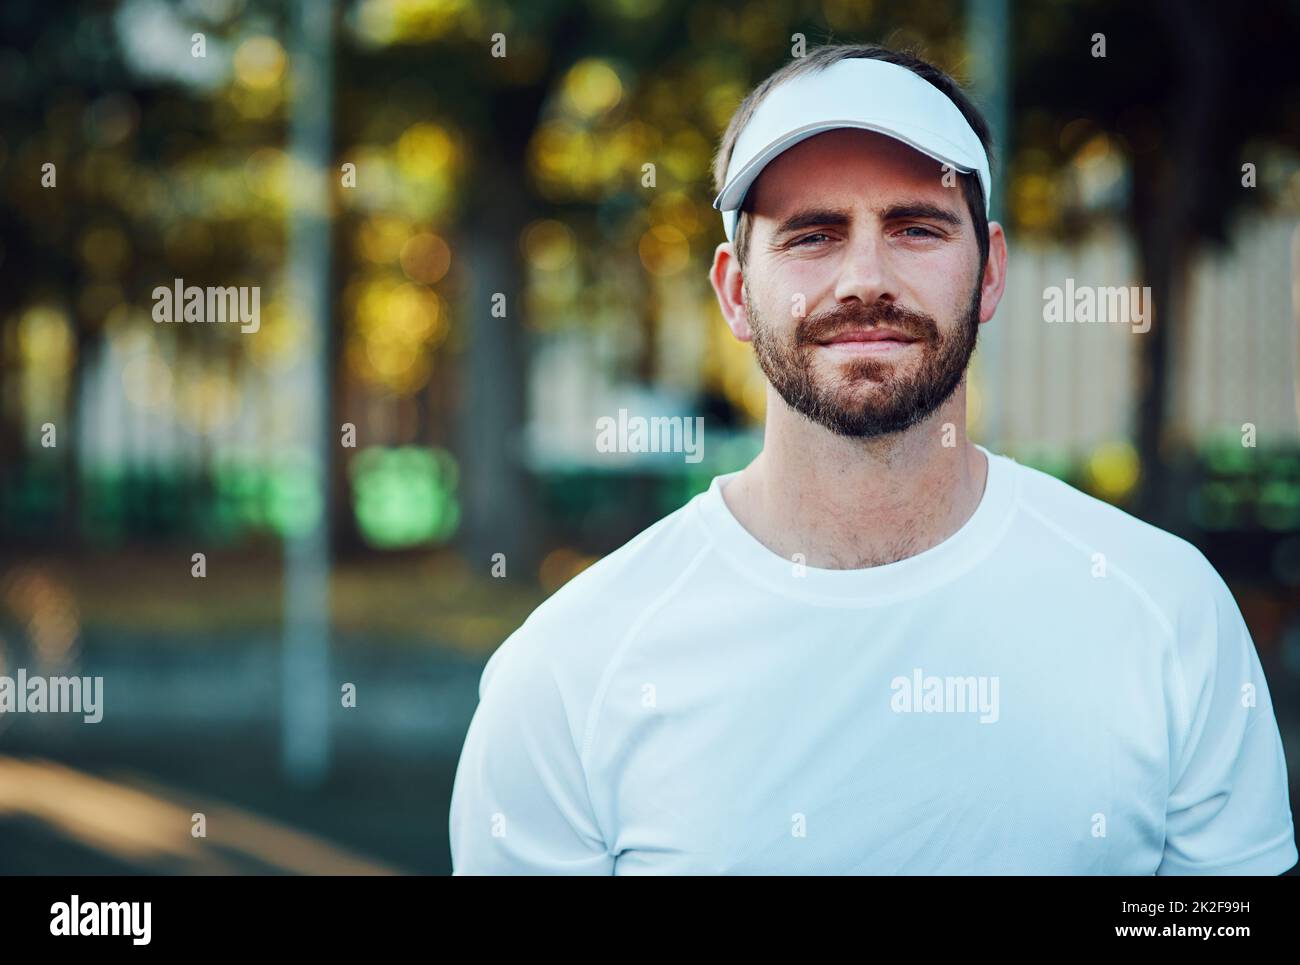 You have to face your challenges head-on. Portrait of a sporty young man standing on a tennis court. Stock Photo